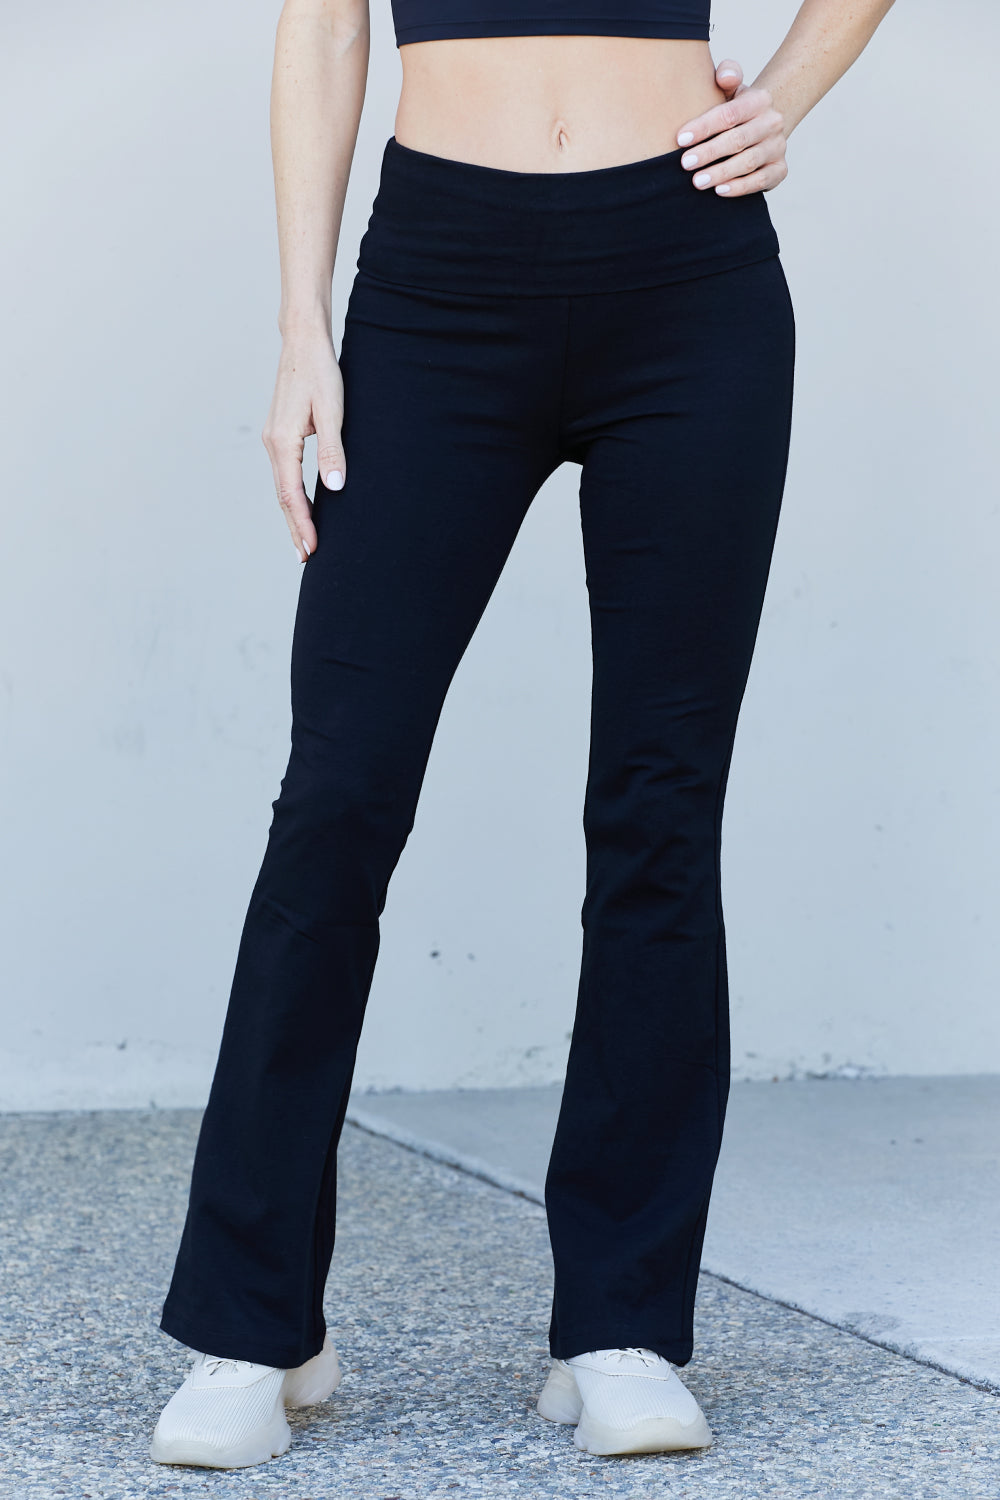 Butter Bell Yoga Pants  Ava Lane Boutique - Women's clothing and  accessories